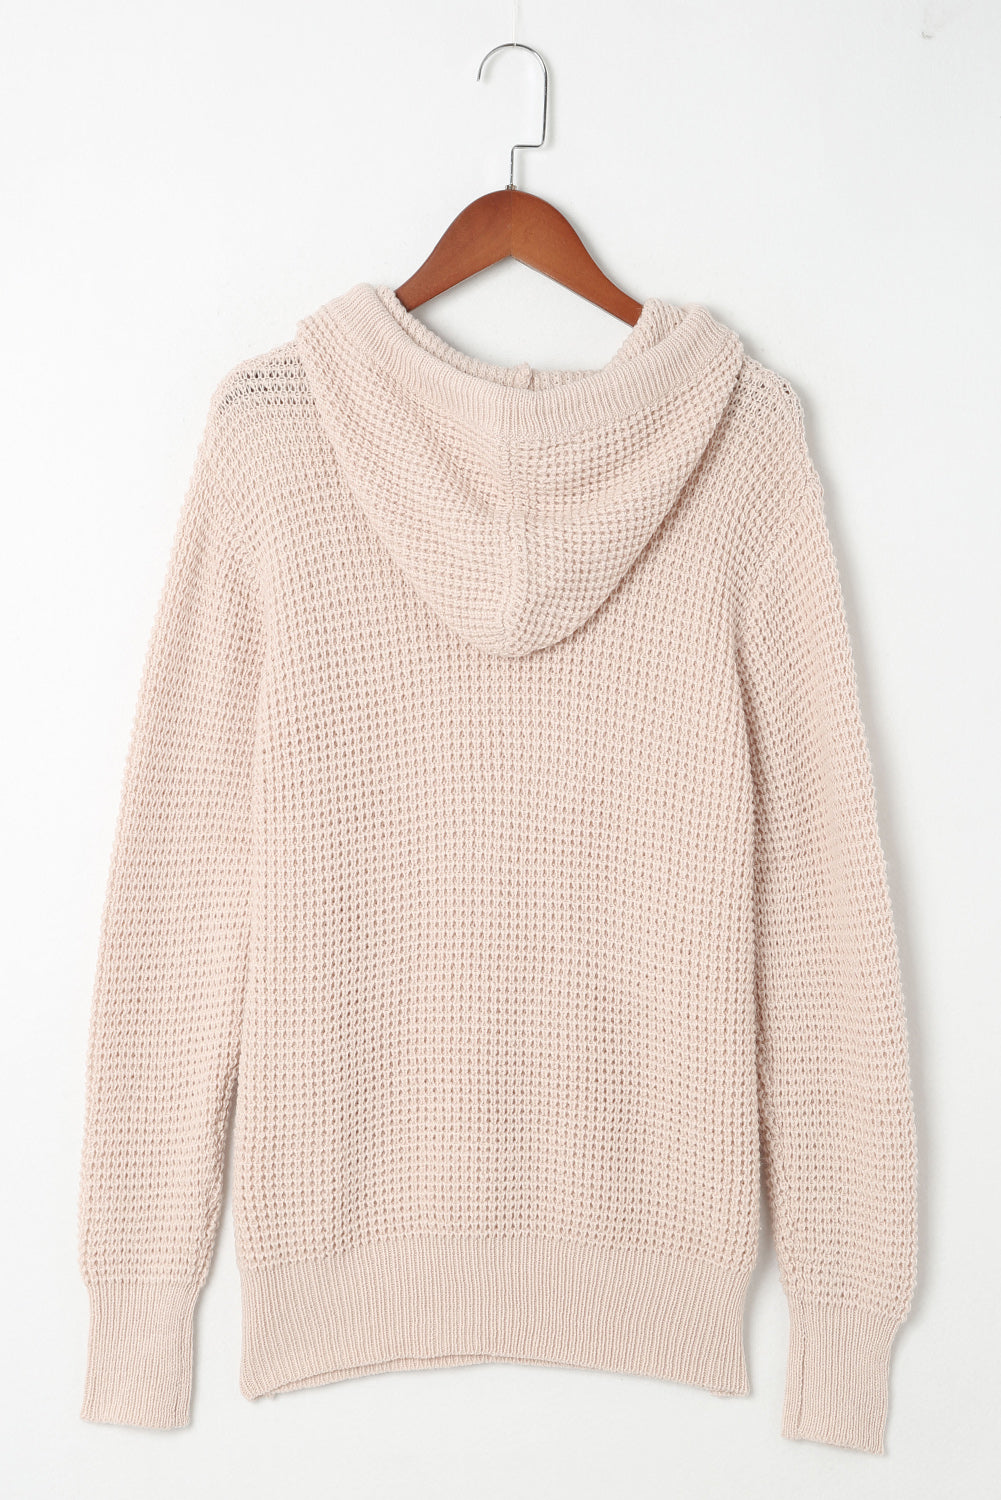 Apricot Waffle Knit Buttons Hooded Sweater with Pocket